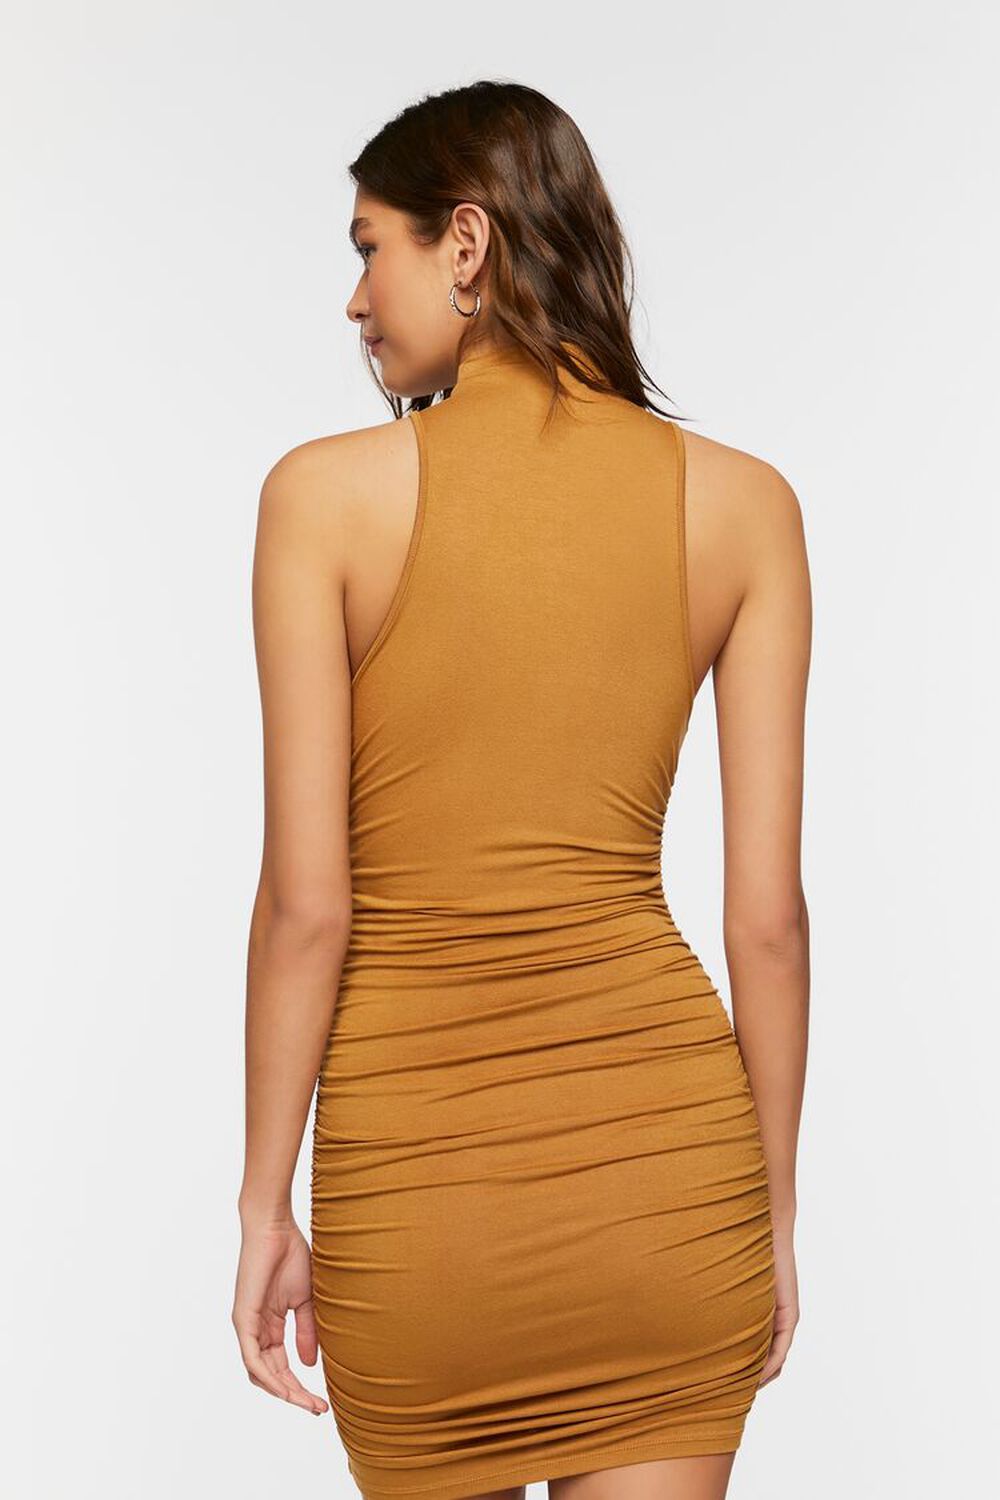 CAPPUCCINO Sleeveless Ruched Bodycon Dress, image 3